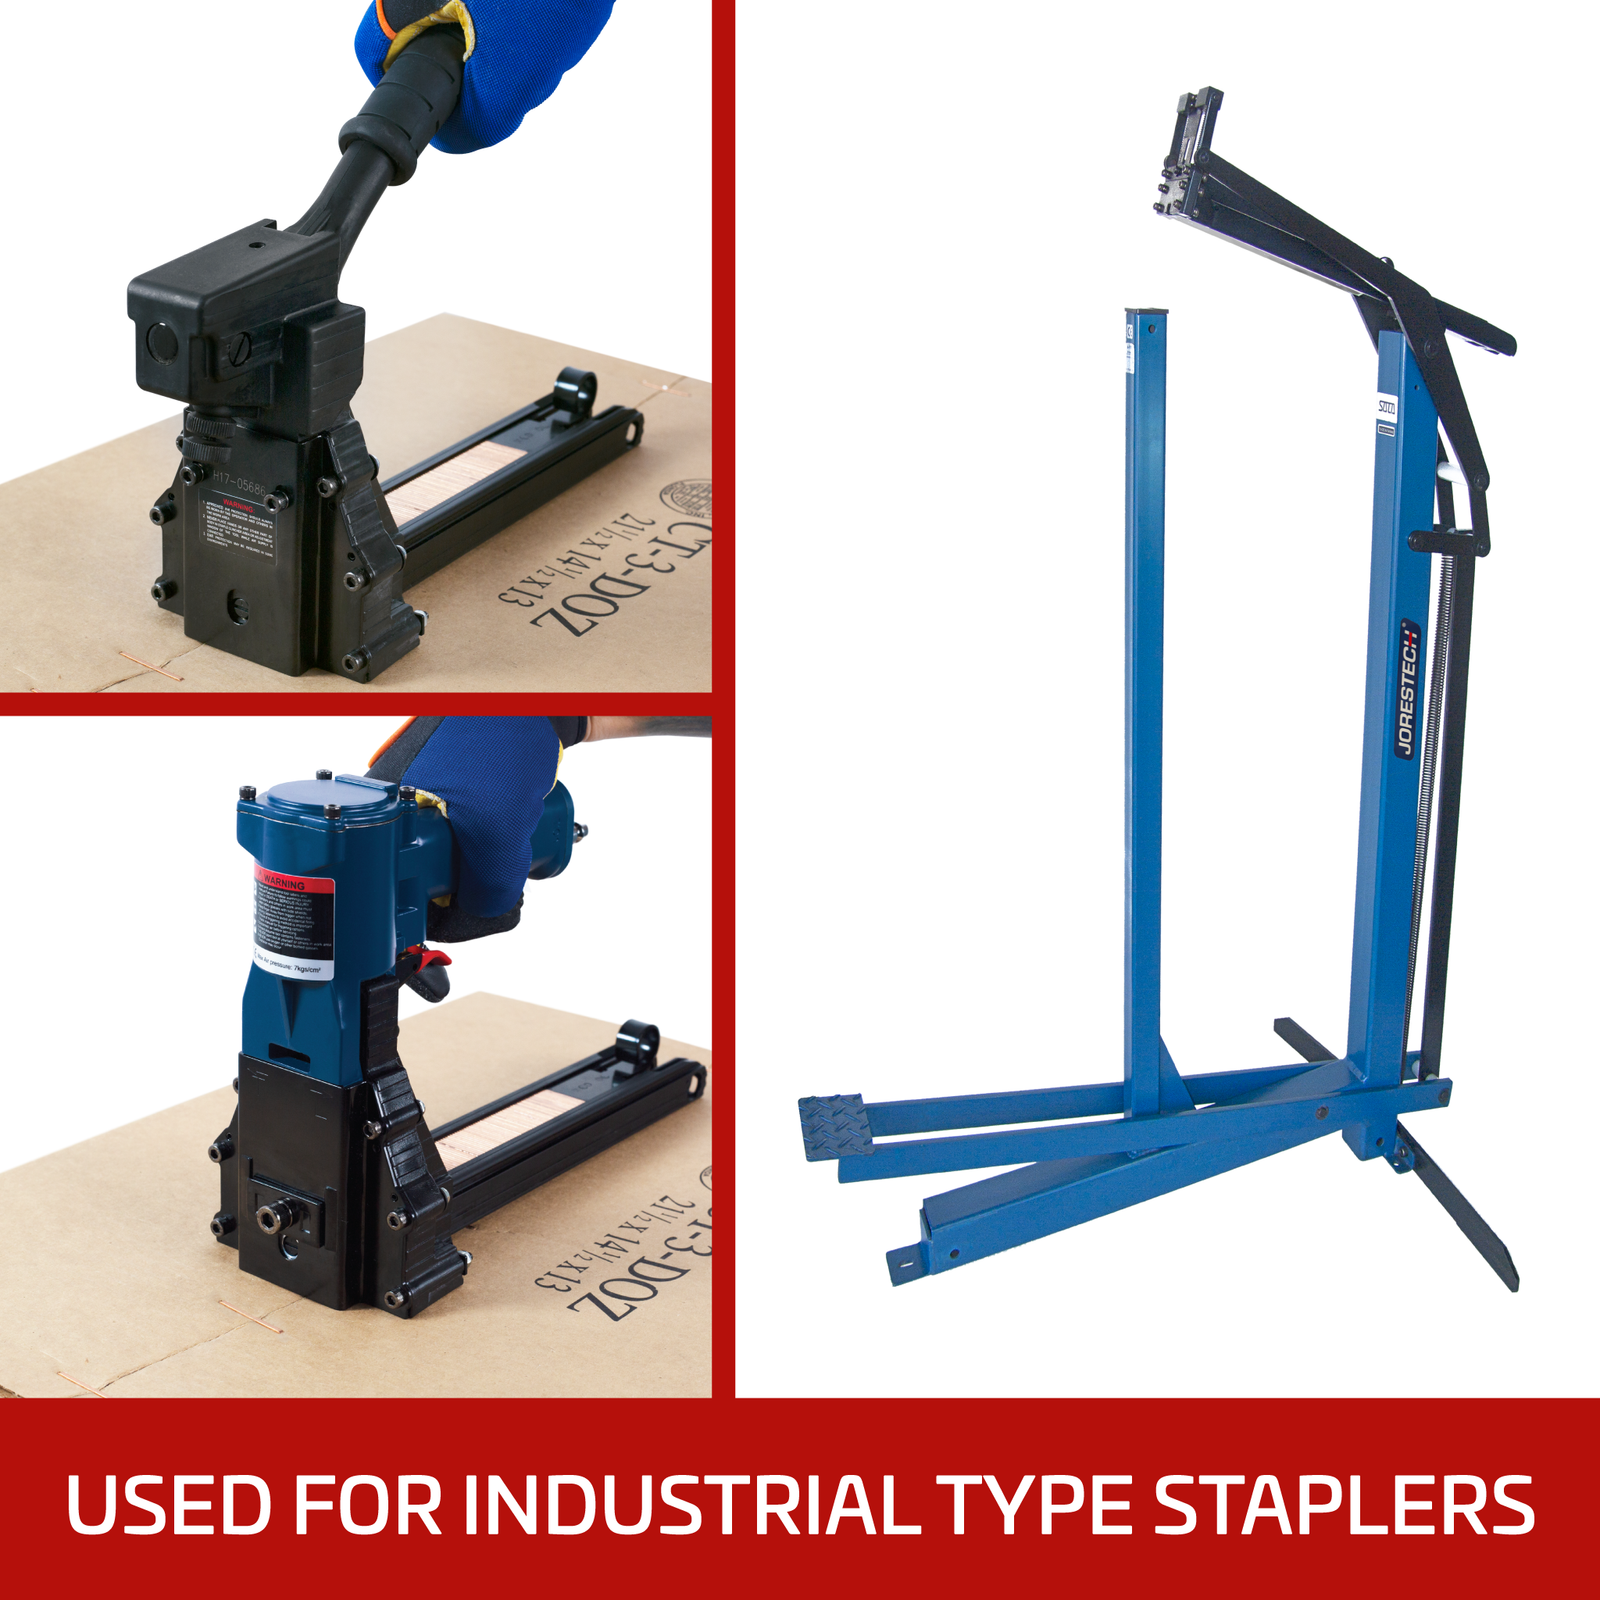 Features different types of staplers compatible with this industrial type of staples. Red title reads: 